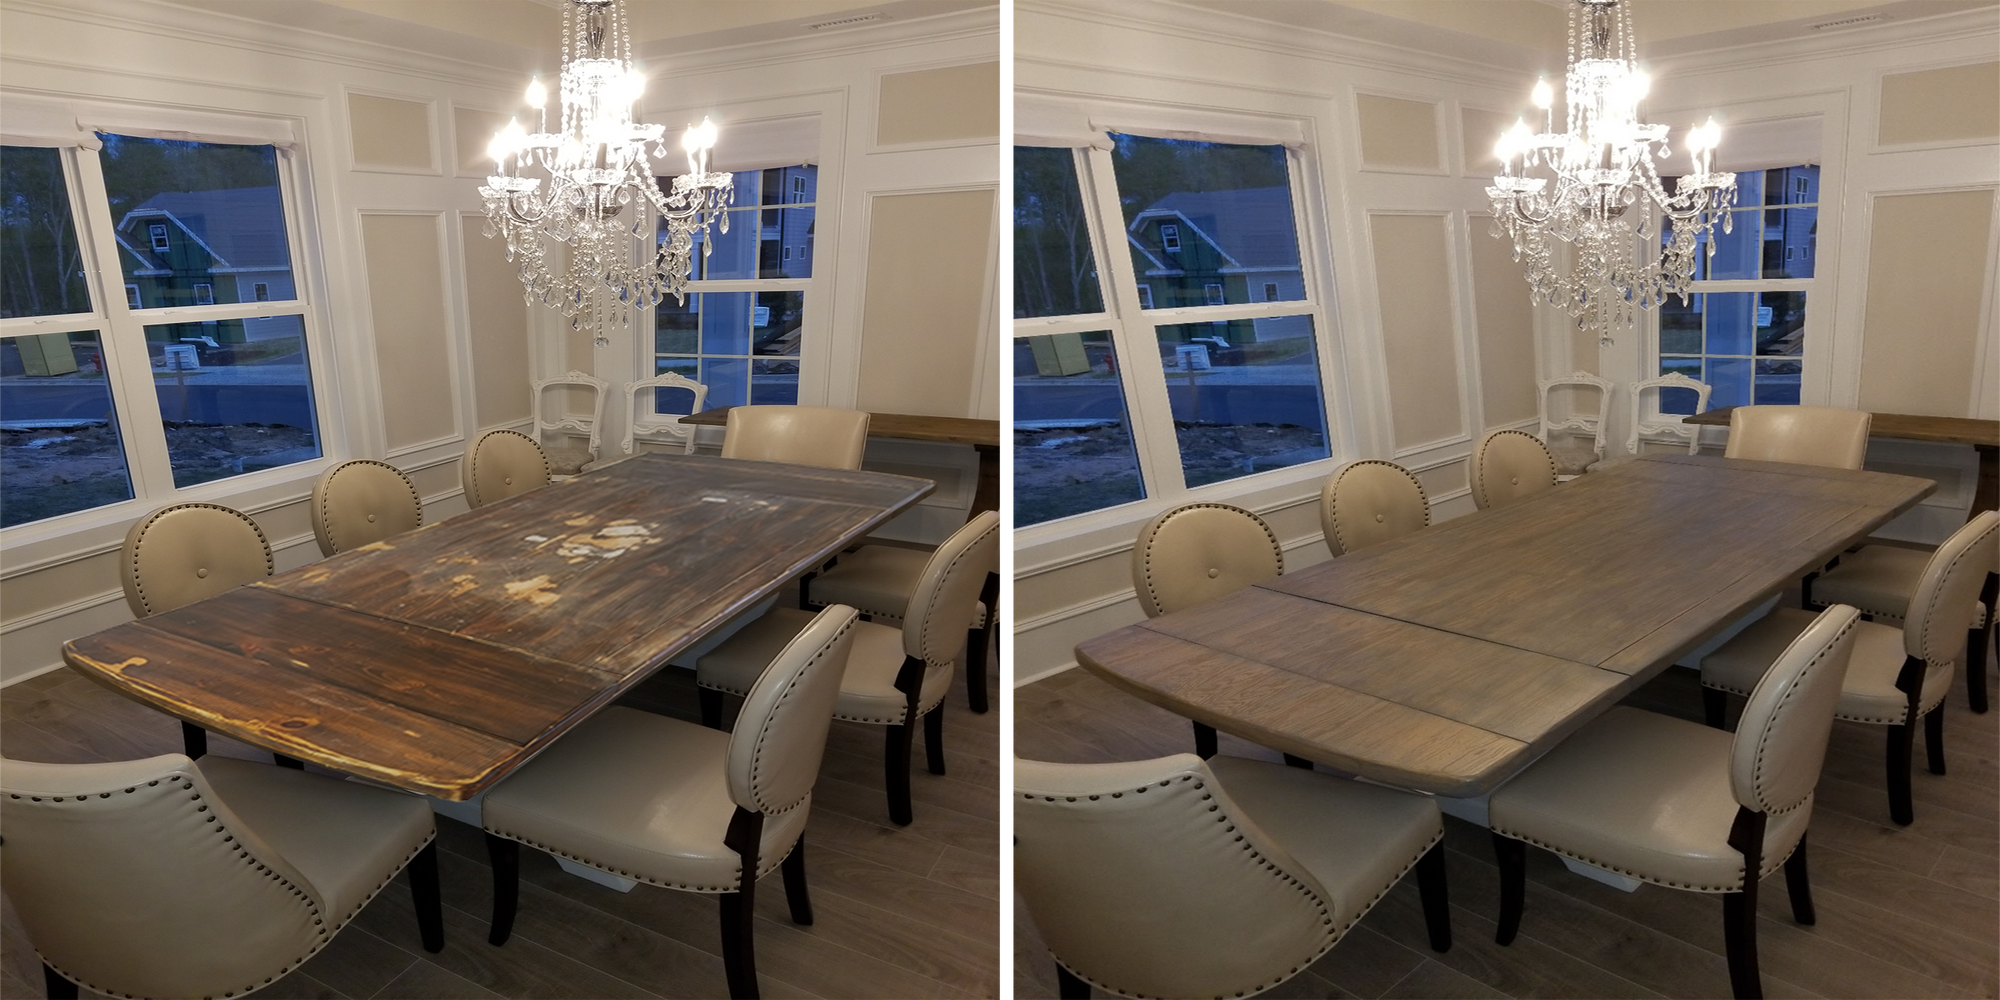 Tables - Before and Afters